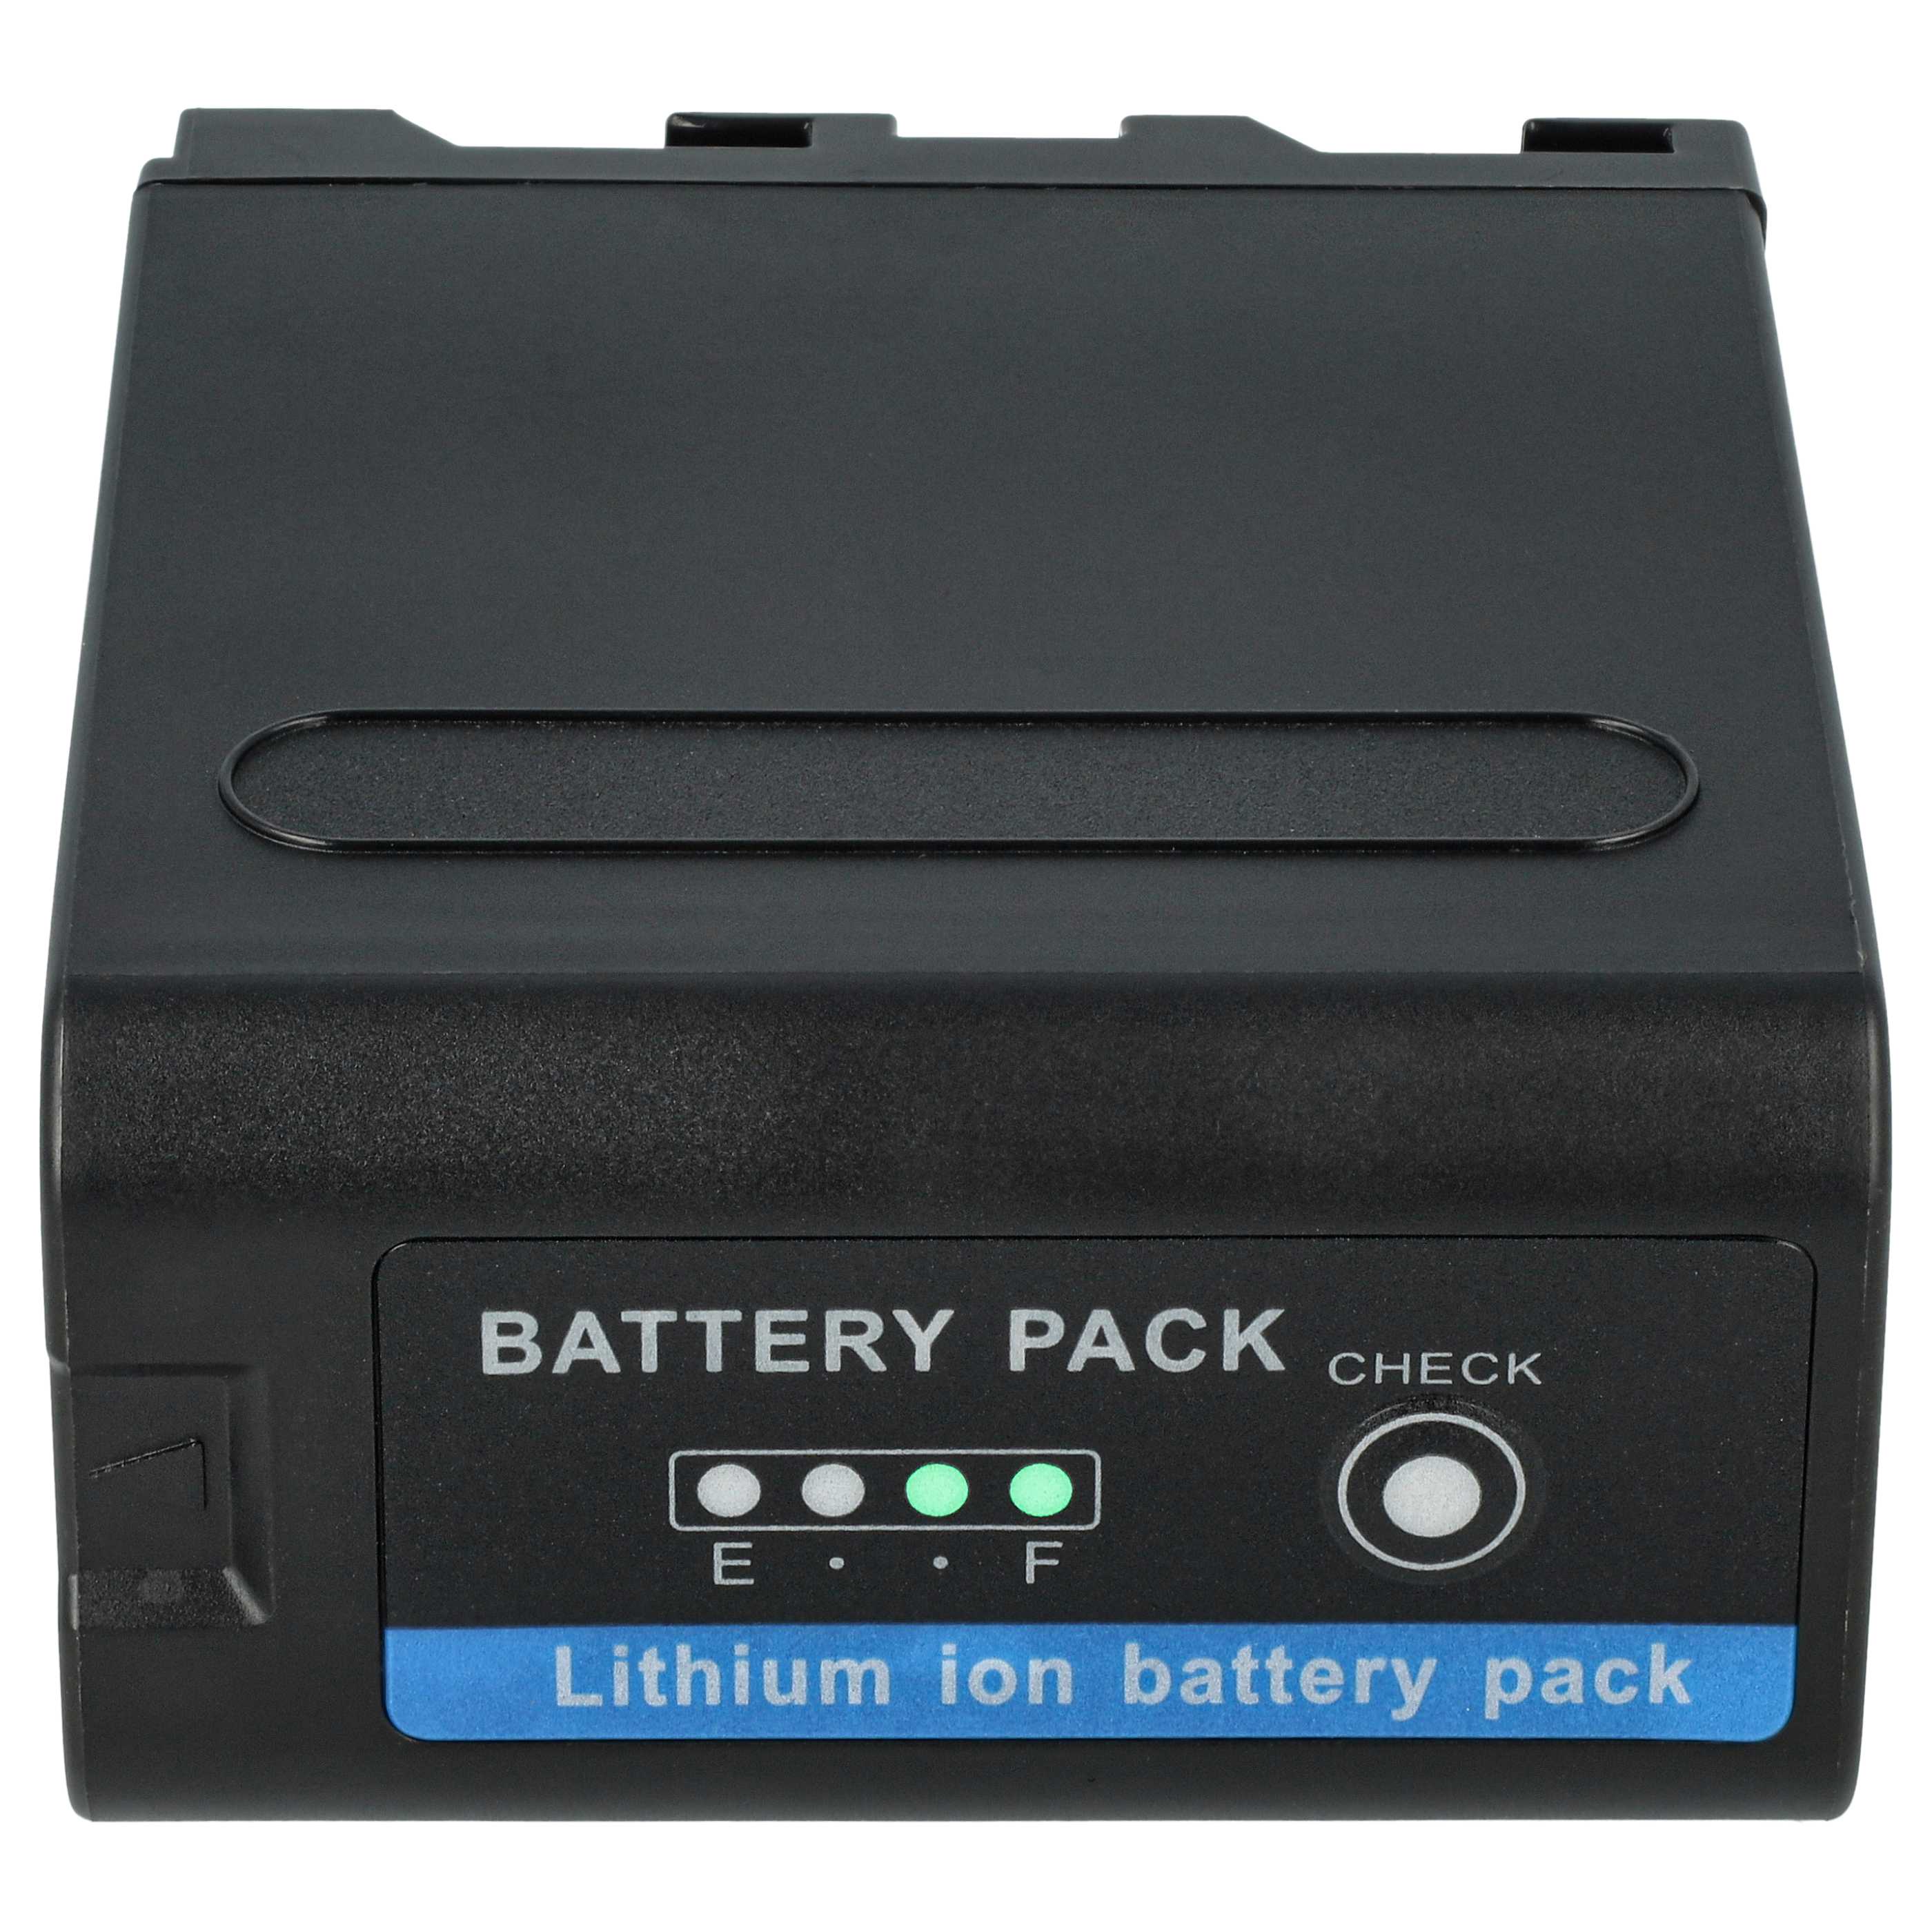 Videocamera Battery (3 Units) Replacement for Sony NP-F930, NP-F970, NP-F960, NP-F950 - 10400mAh 7.4V Li-Ion